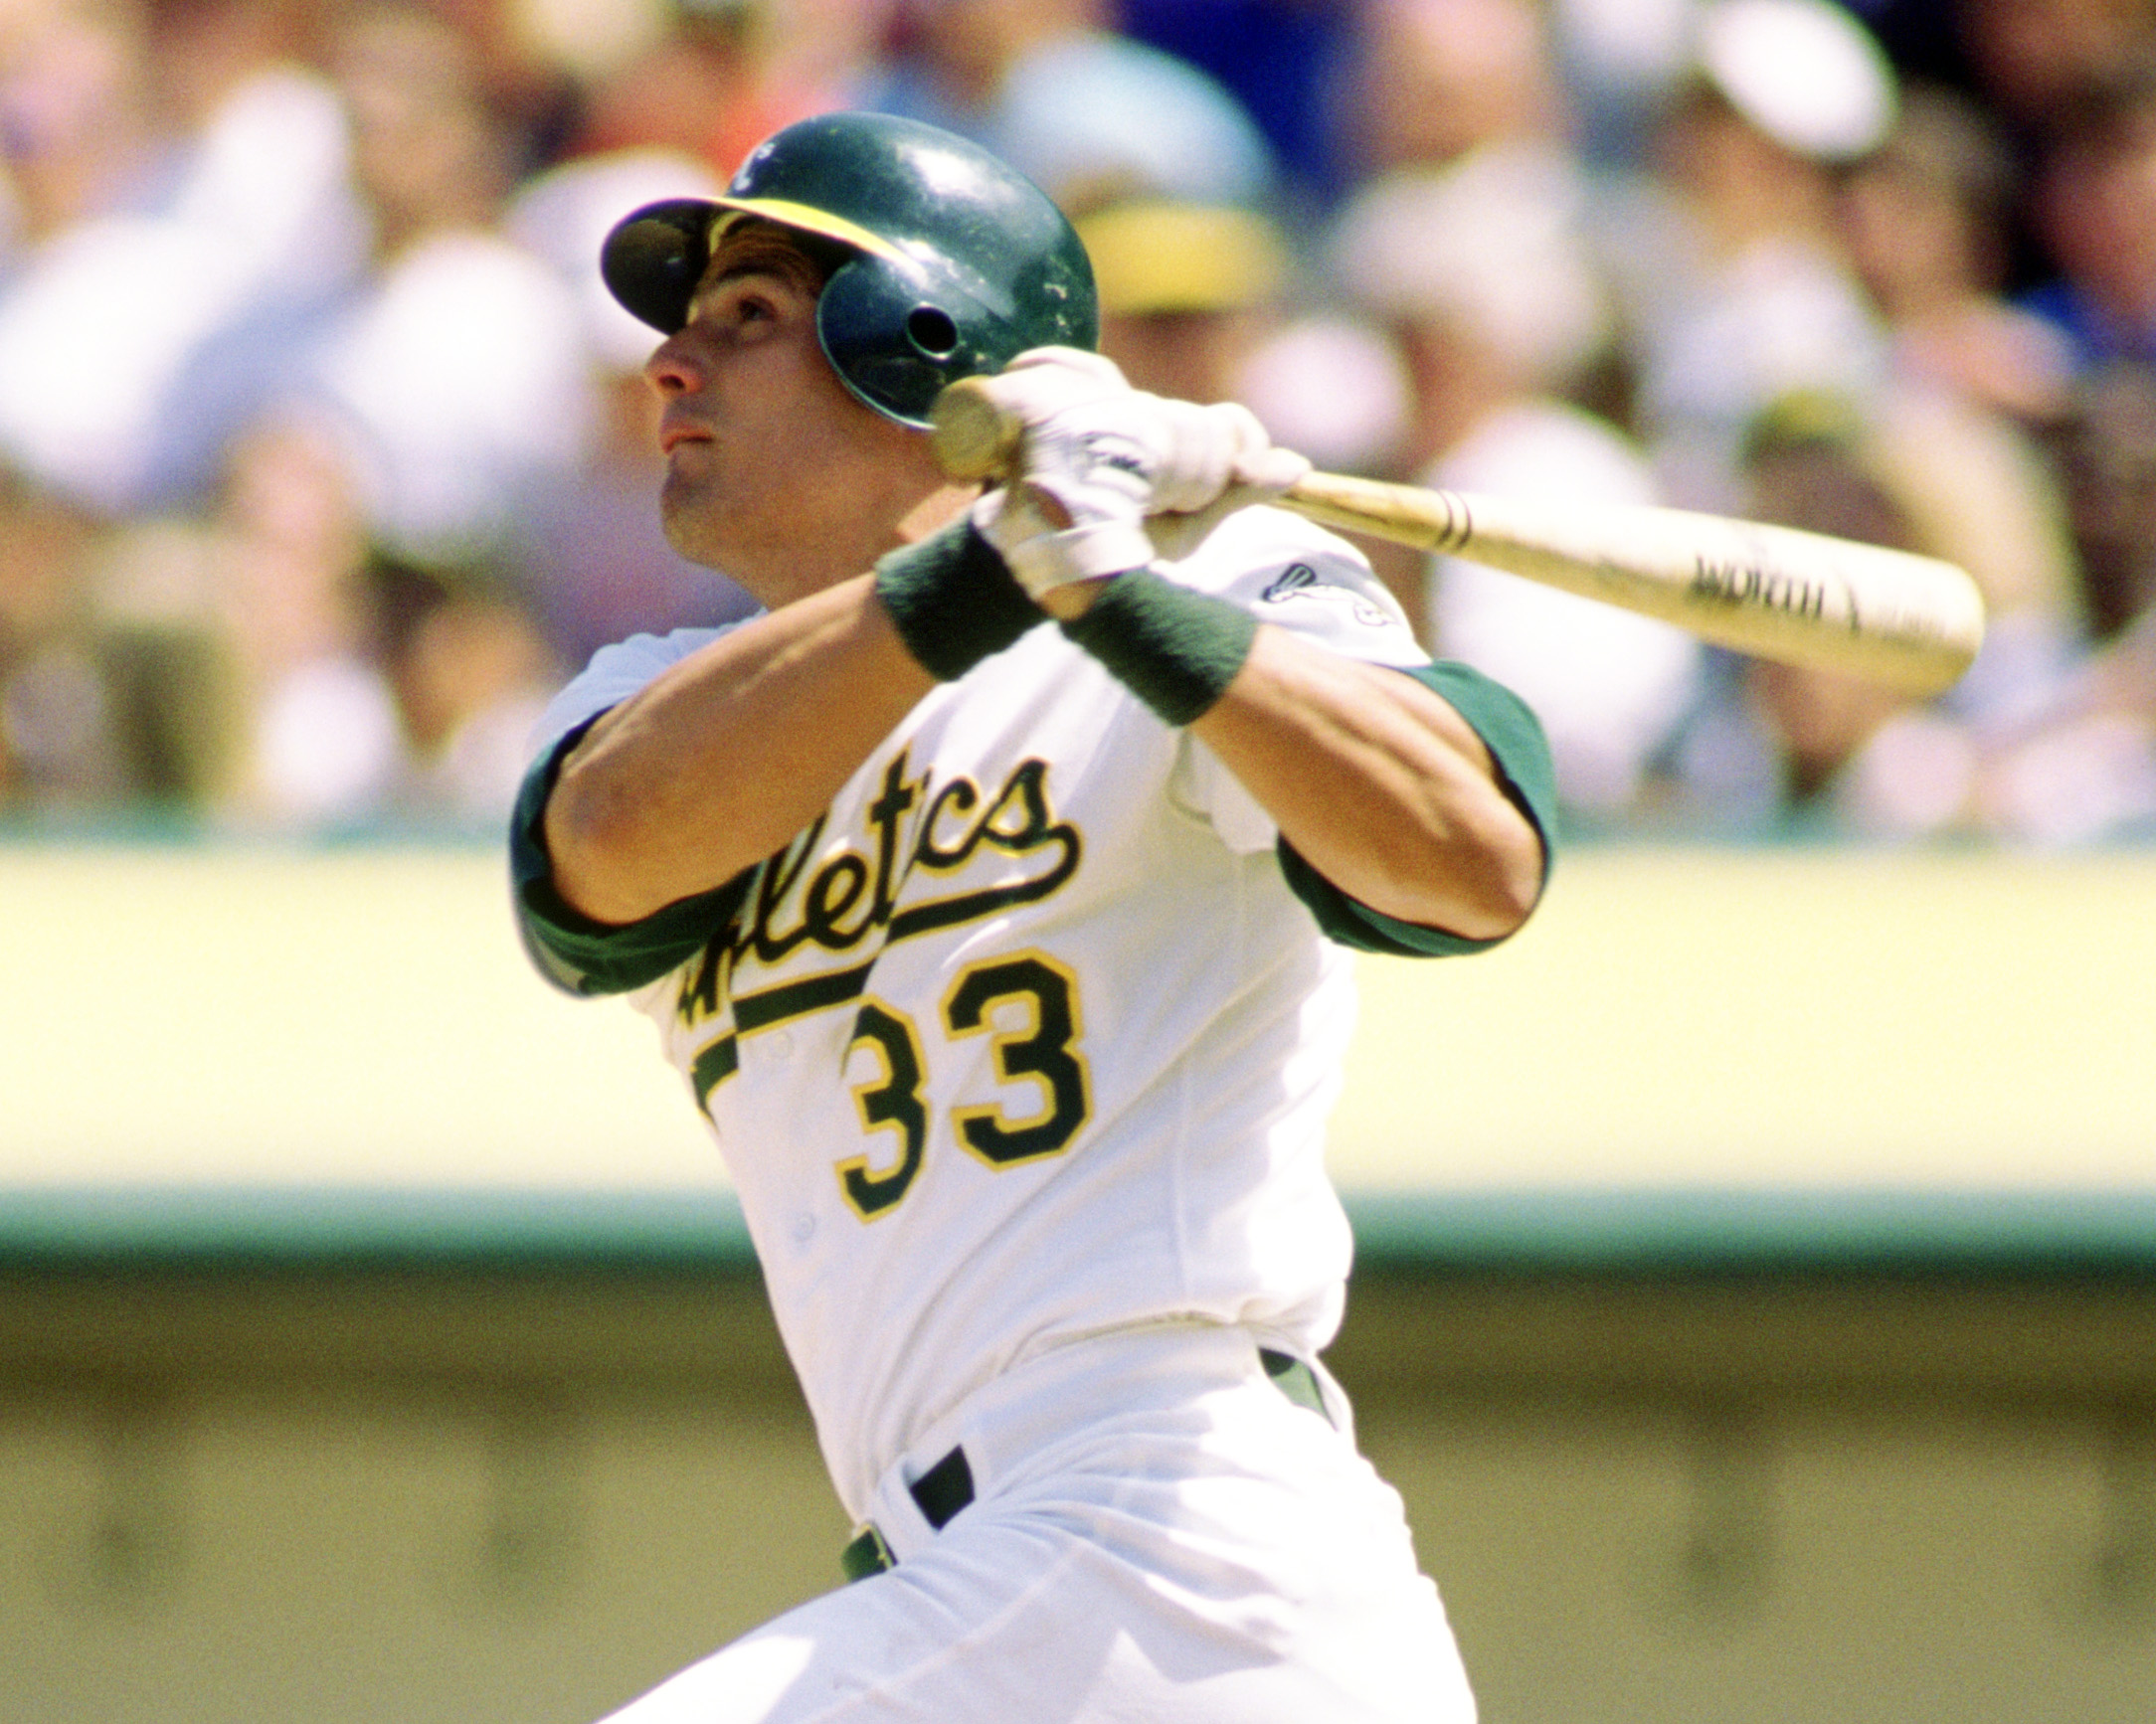 Jose Canseco made a promise to his dying mother that led to his steroid use.